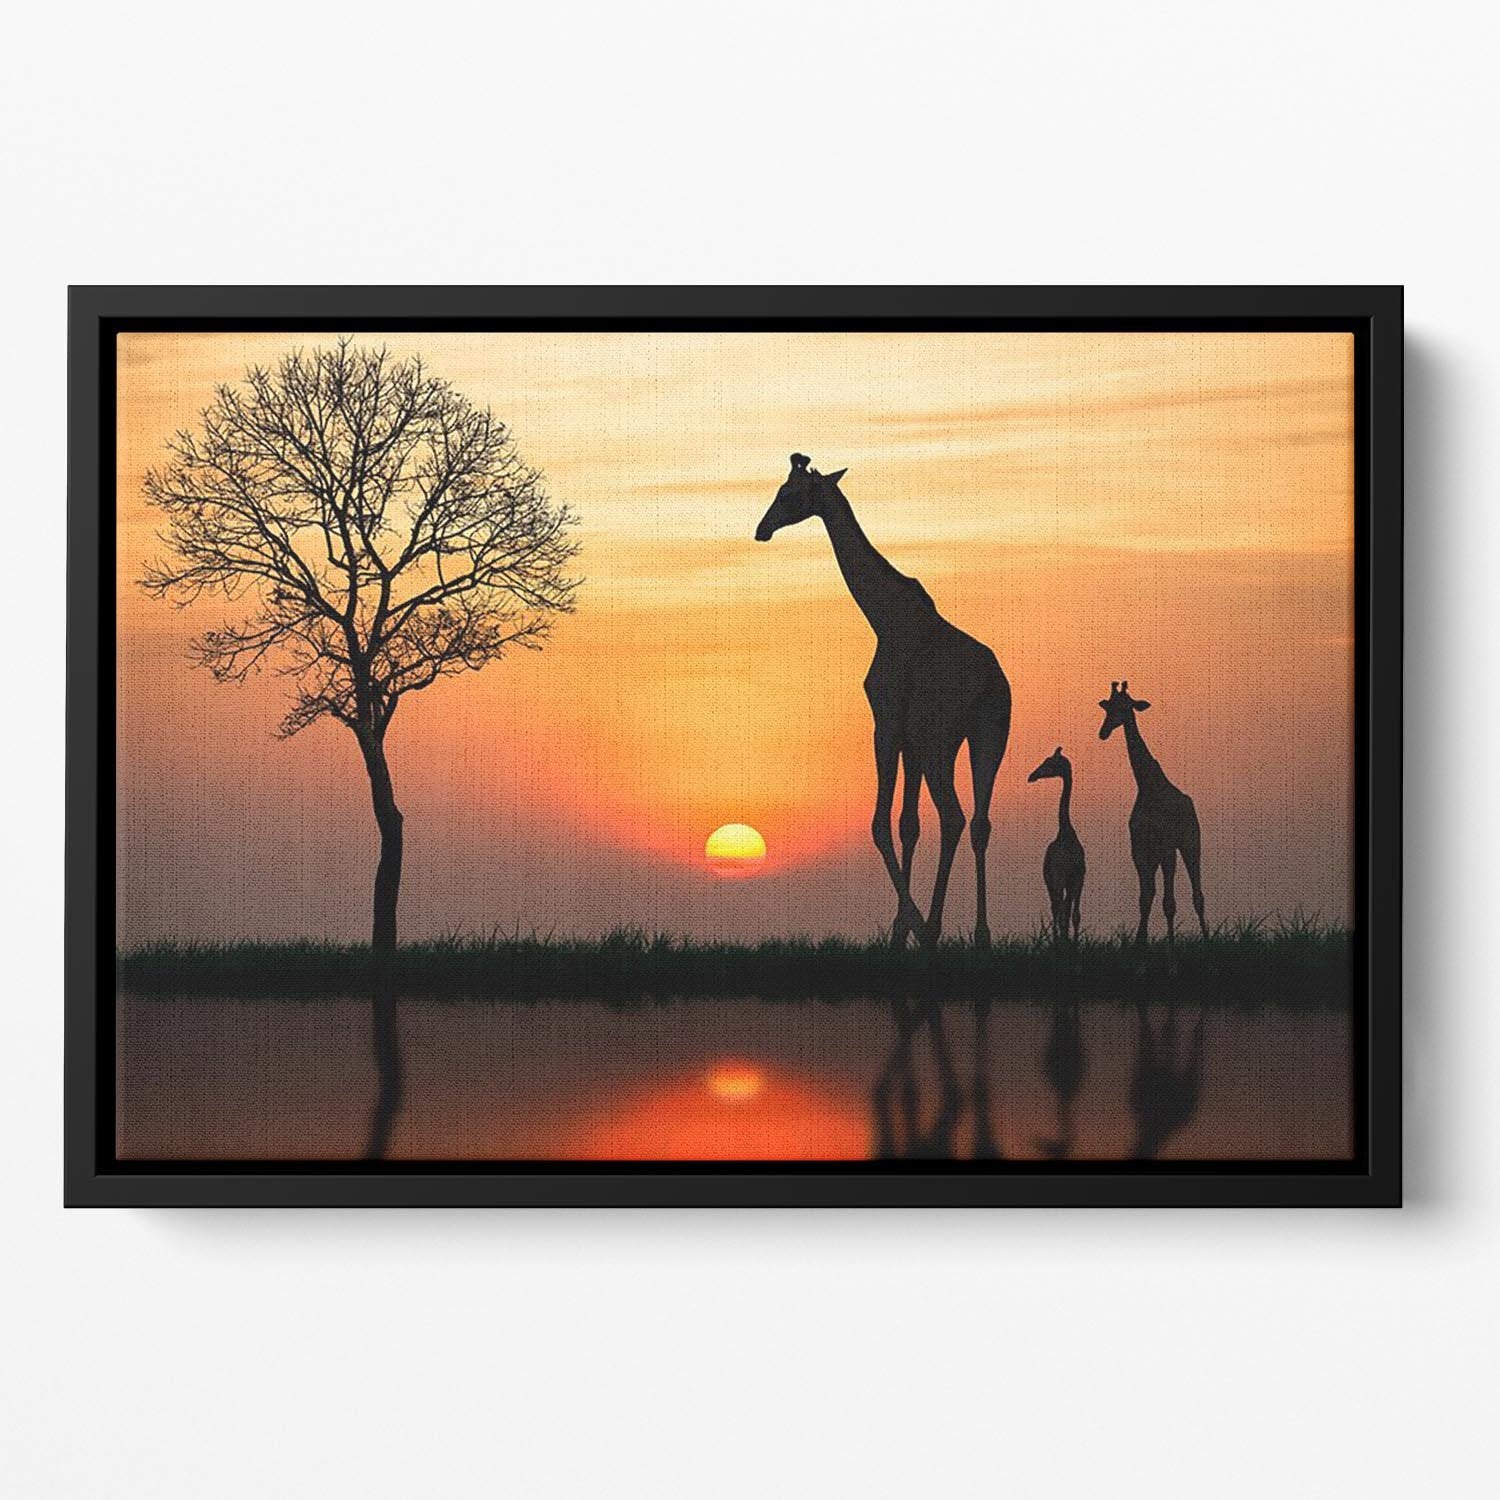 Silhouette of giraffe with reflection in water Floating Framed Canvas - Canvas Art Rocks - 2